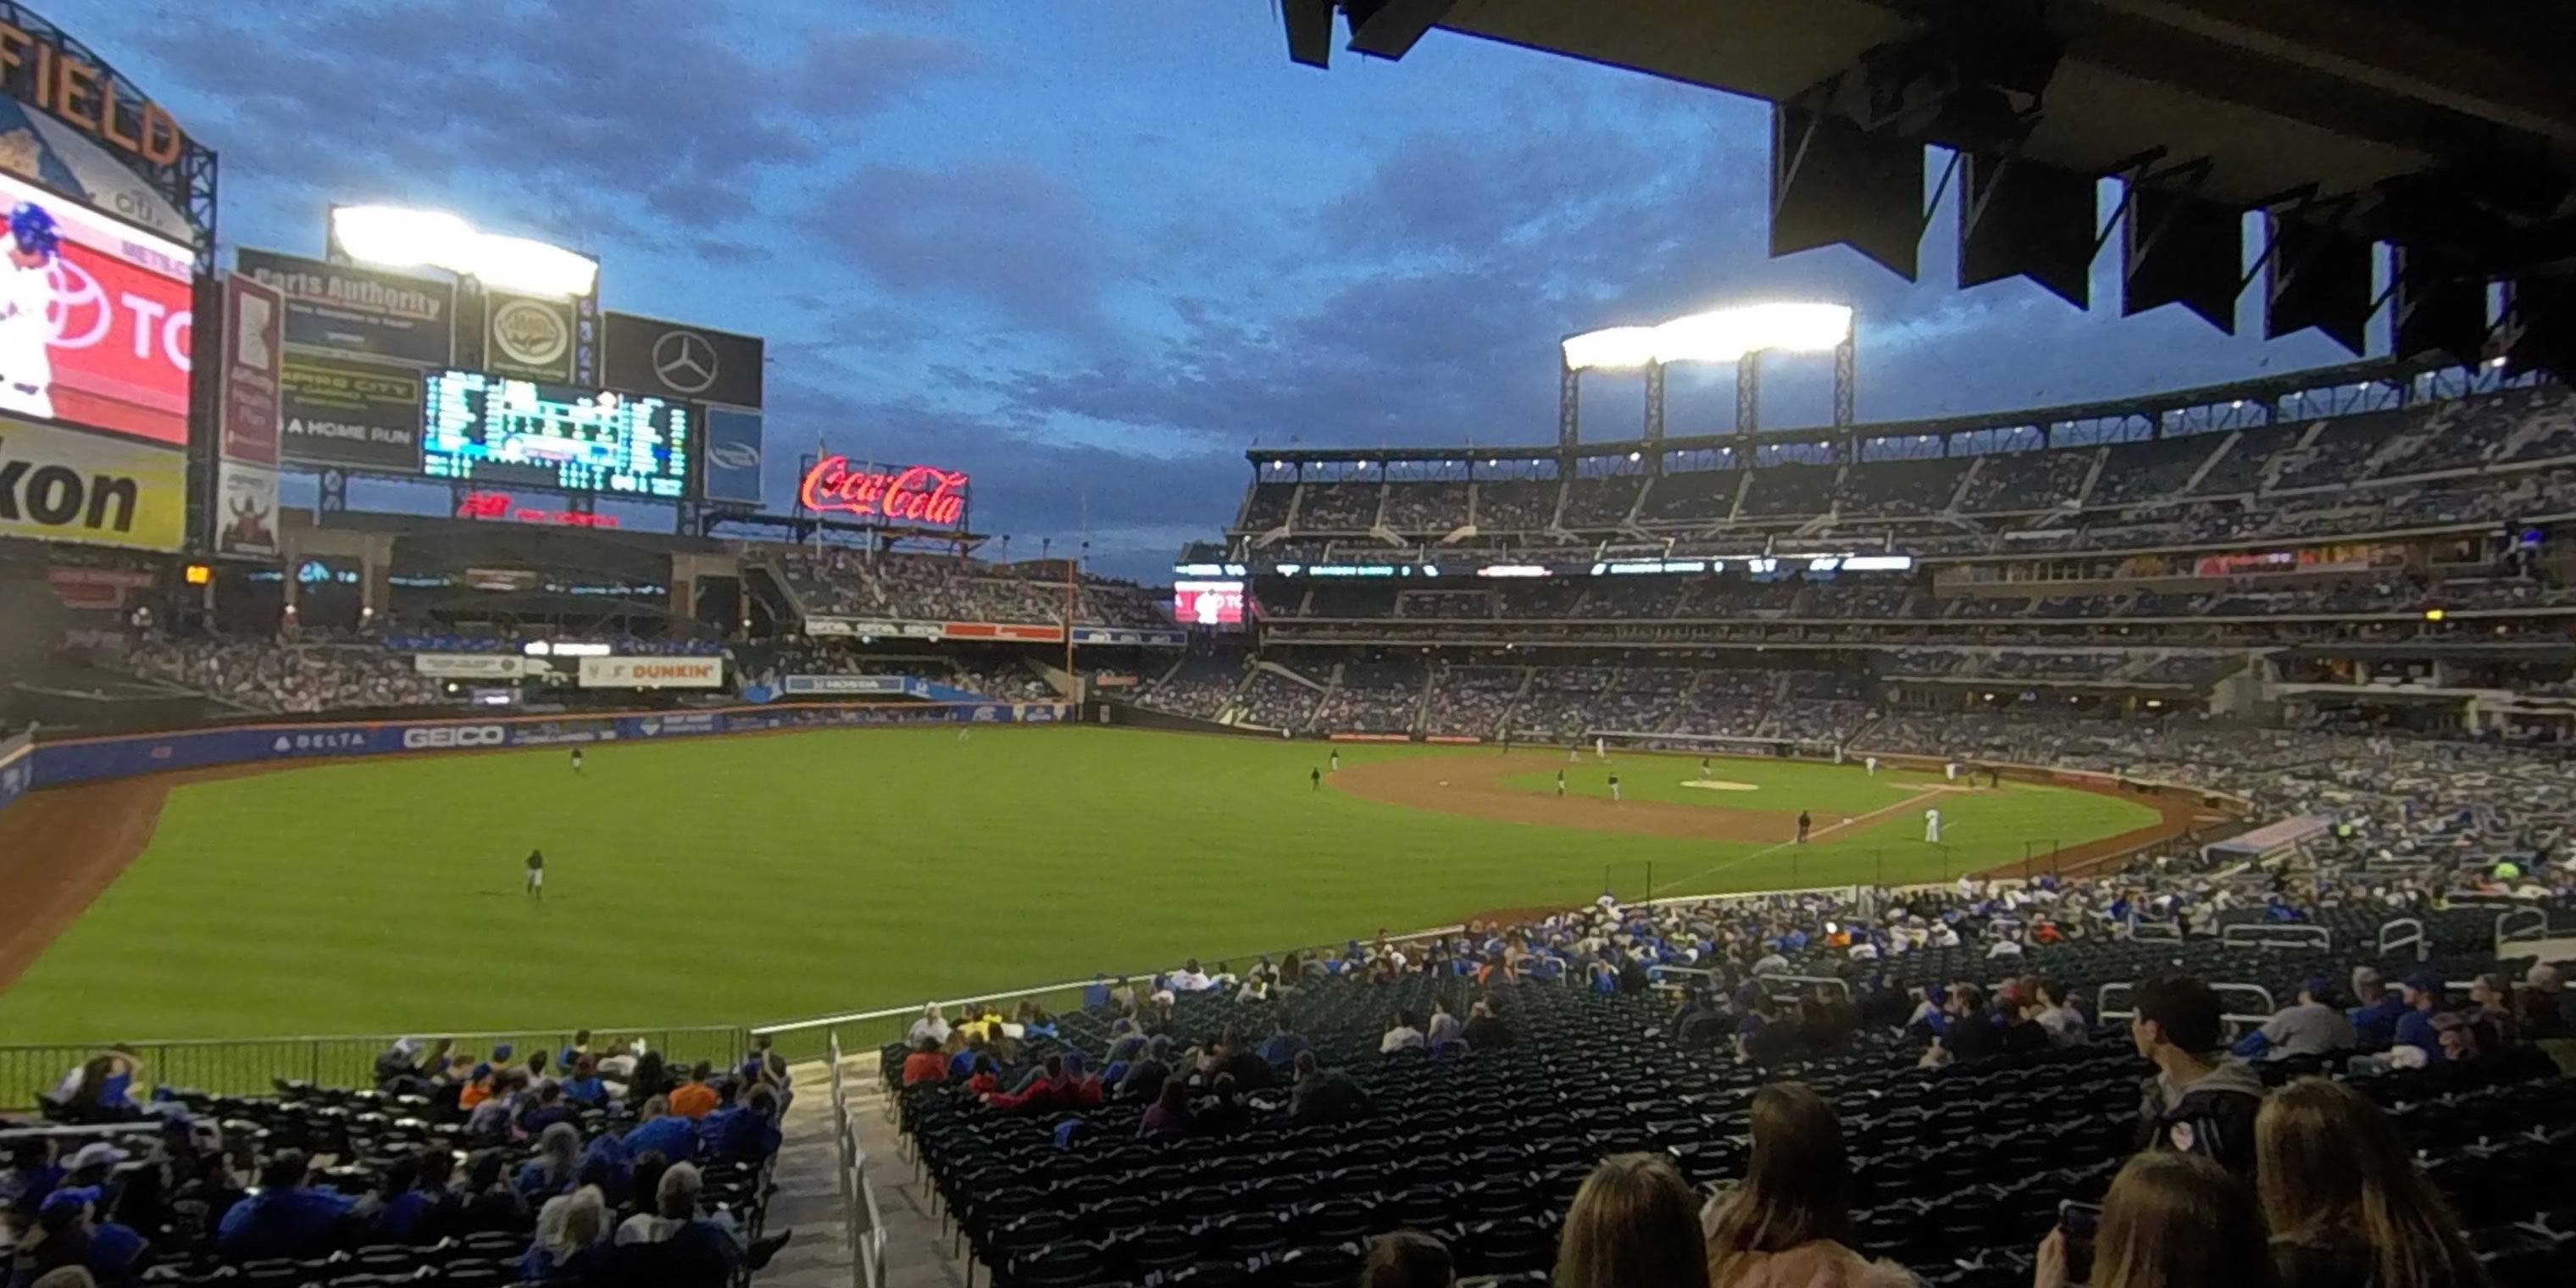 section 129 panoramic seat view  - citi field